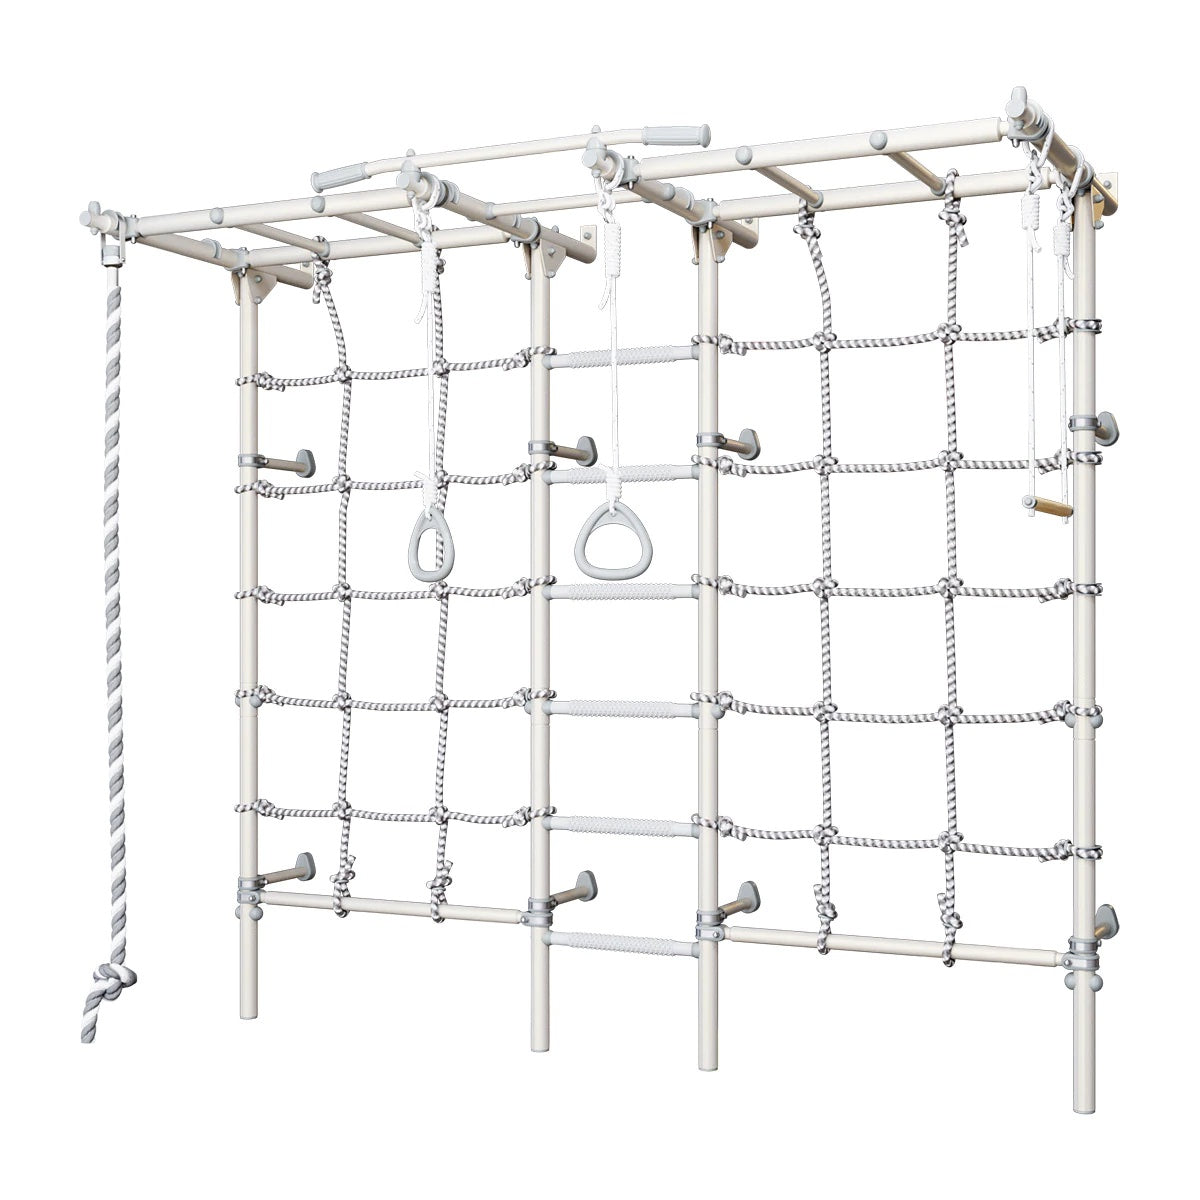 Monkey Bars, Trapeze, Roman Rings, Rope Ladder, Sensory ladders home play equipments for kids